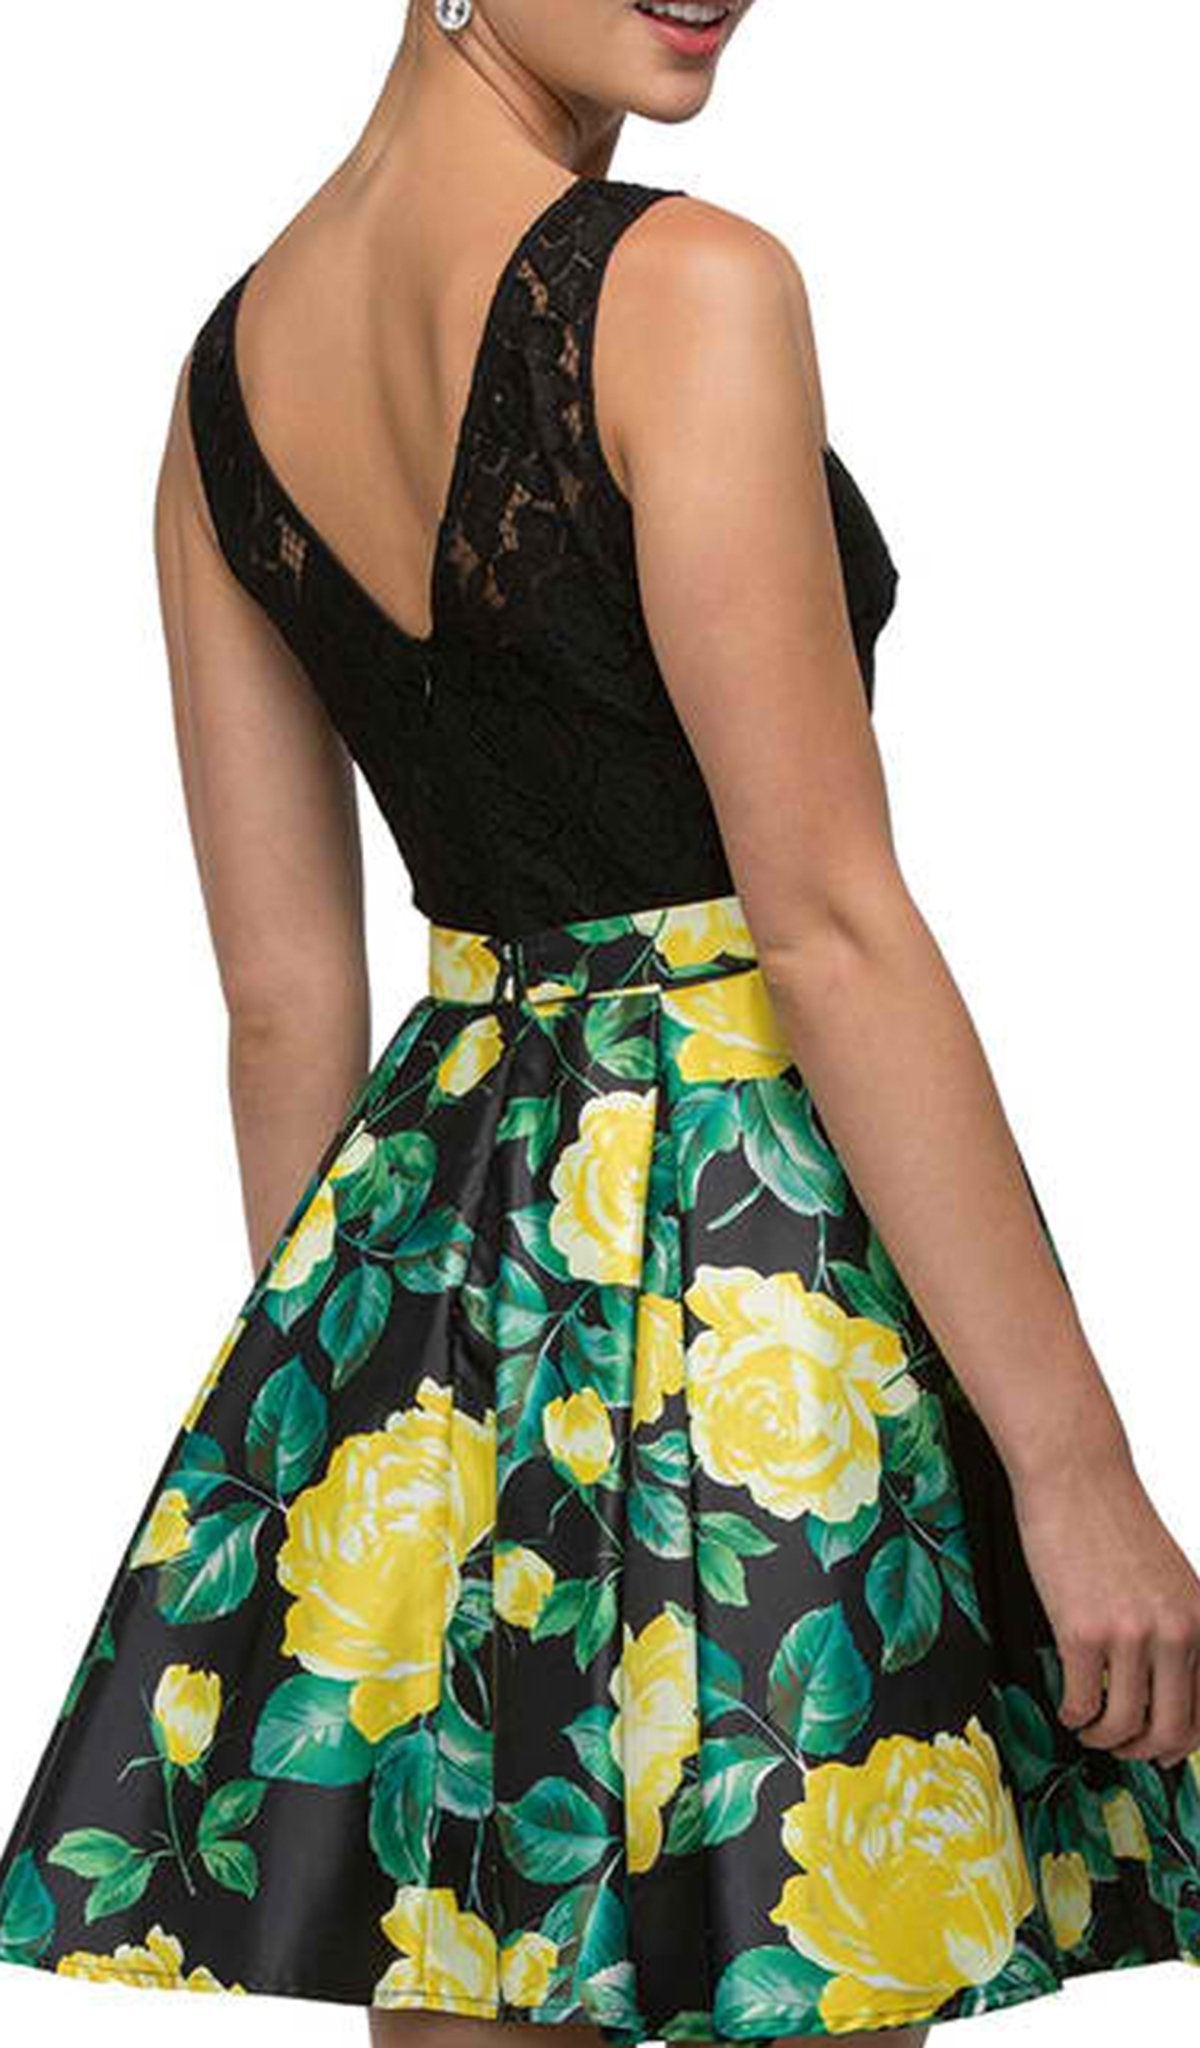 Dancing Queen - 9517 Floral Print Illusion A-Line Cocktail Dress Special Occasion Dress